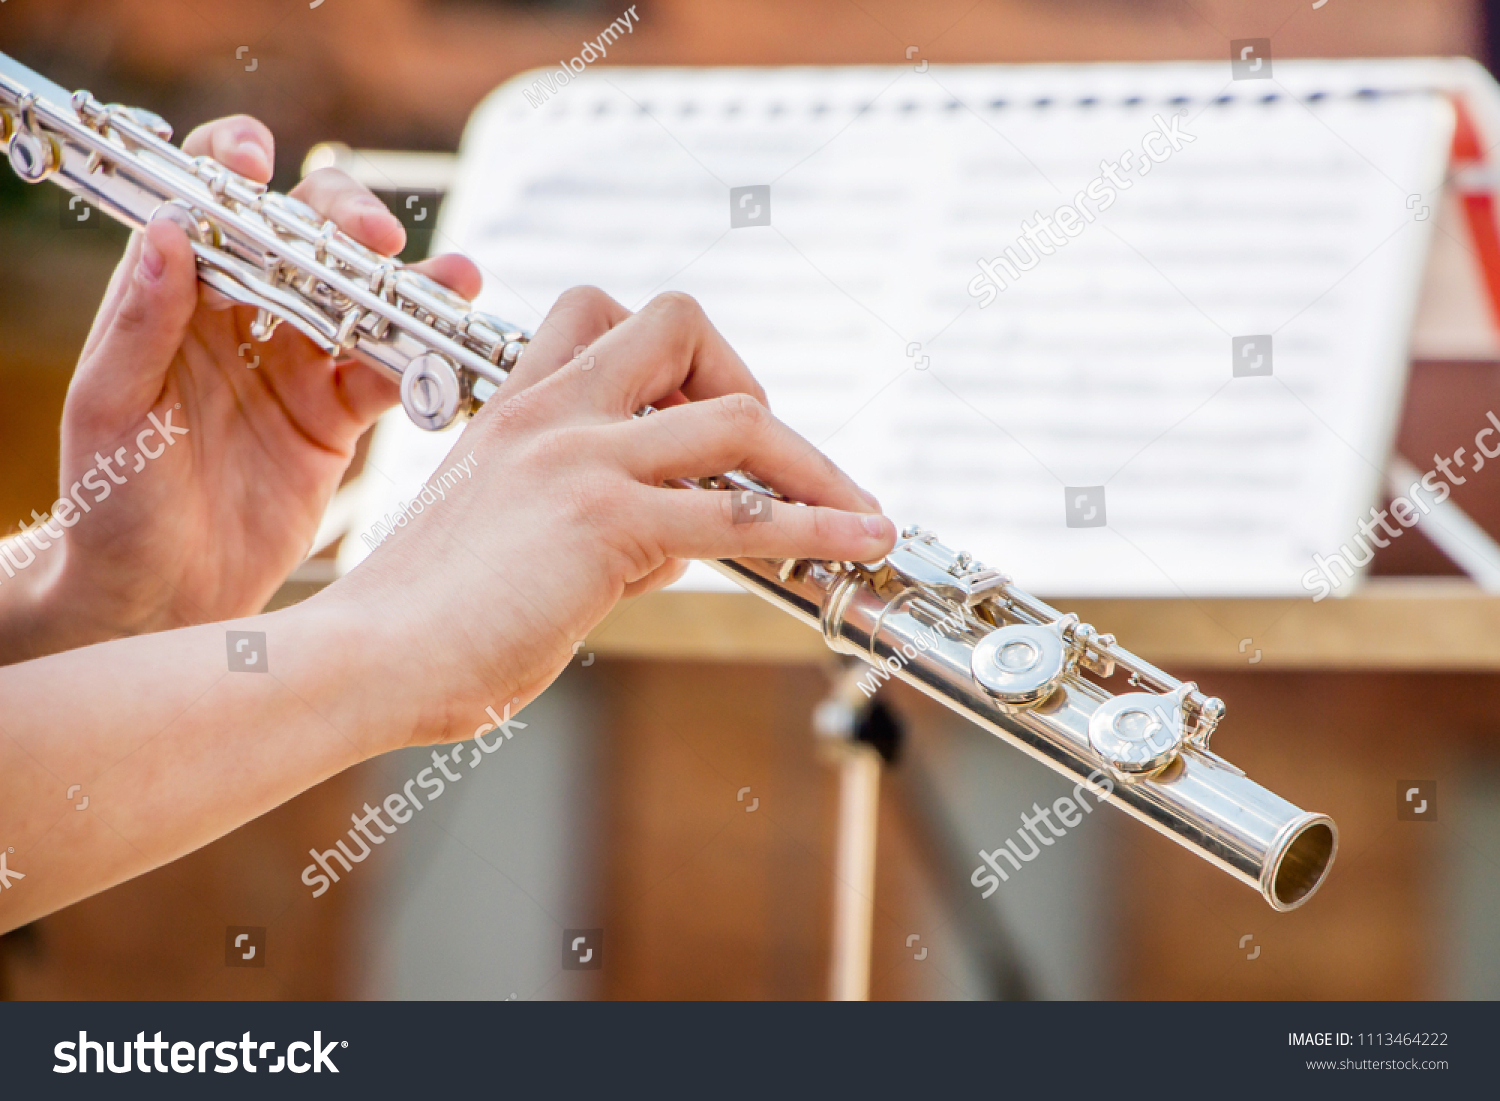 The girl plays the flute. Flute in the hands of the musician during the performance of the musical play #1113464222